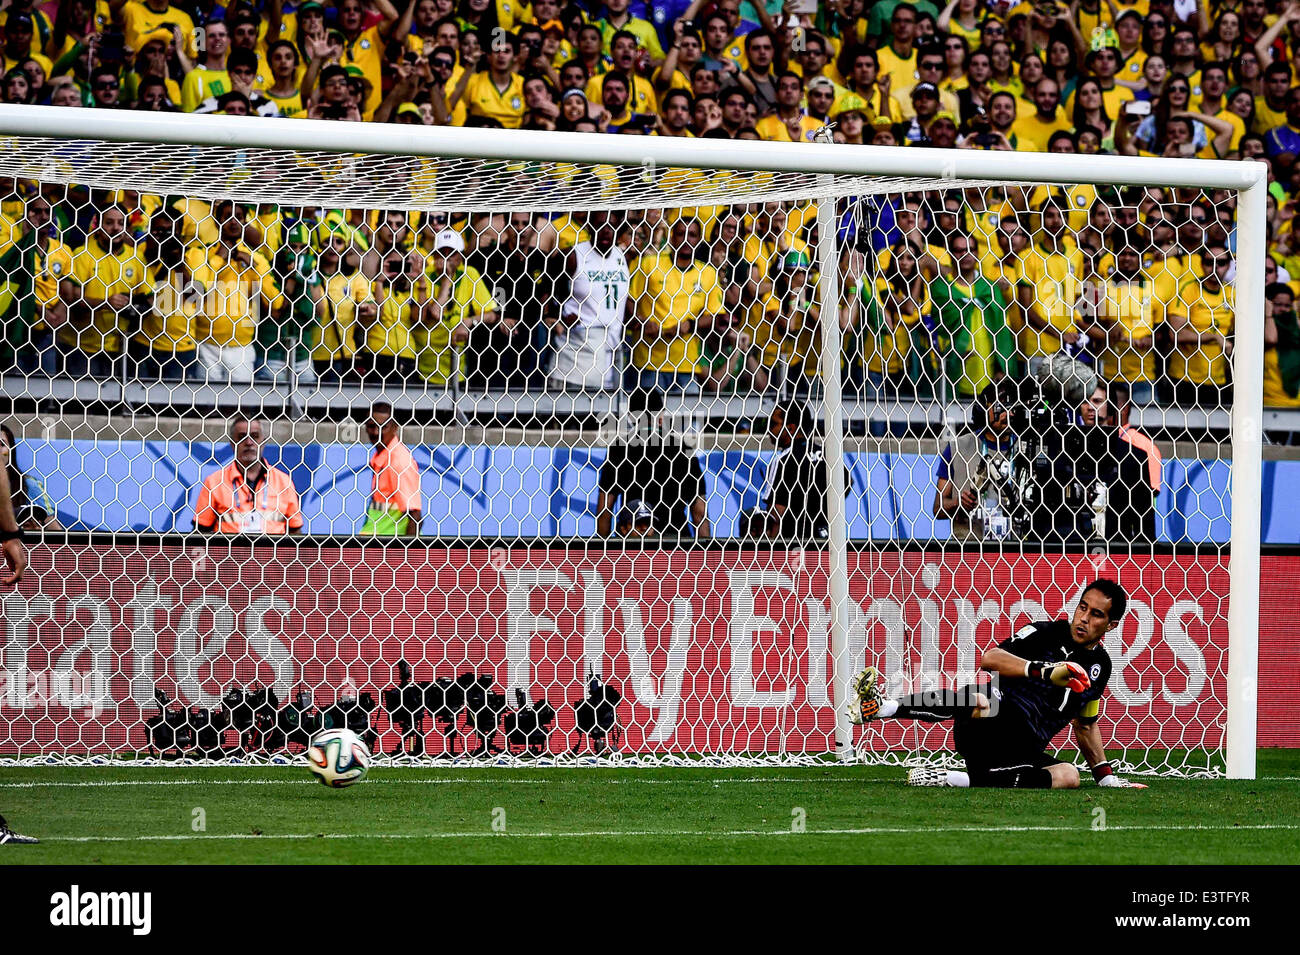 Belo Horizonte, Minas Gerais, Brazil. 28th June, 2014. Brazil wins Chile in the penalty shootouts at the Round of 16 match of the 2014 World Cup, this saturday, June 28th, in Belo Horizonte. Julio Cesar saved the kicks from Mauricio Pinilla and Alexis Sanchez. Willian and Hulk, from Brazil, missed the goal. David Luiz, Marcelo and Neymar, for Brazil, and Aranguiz and Diaz, for Chile, scored. The final result 3-2 Credit:  Gustavo Basso/NurPhoto/ZUMAPRESS.com/Alamy Live News Stock Photo